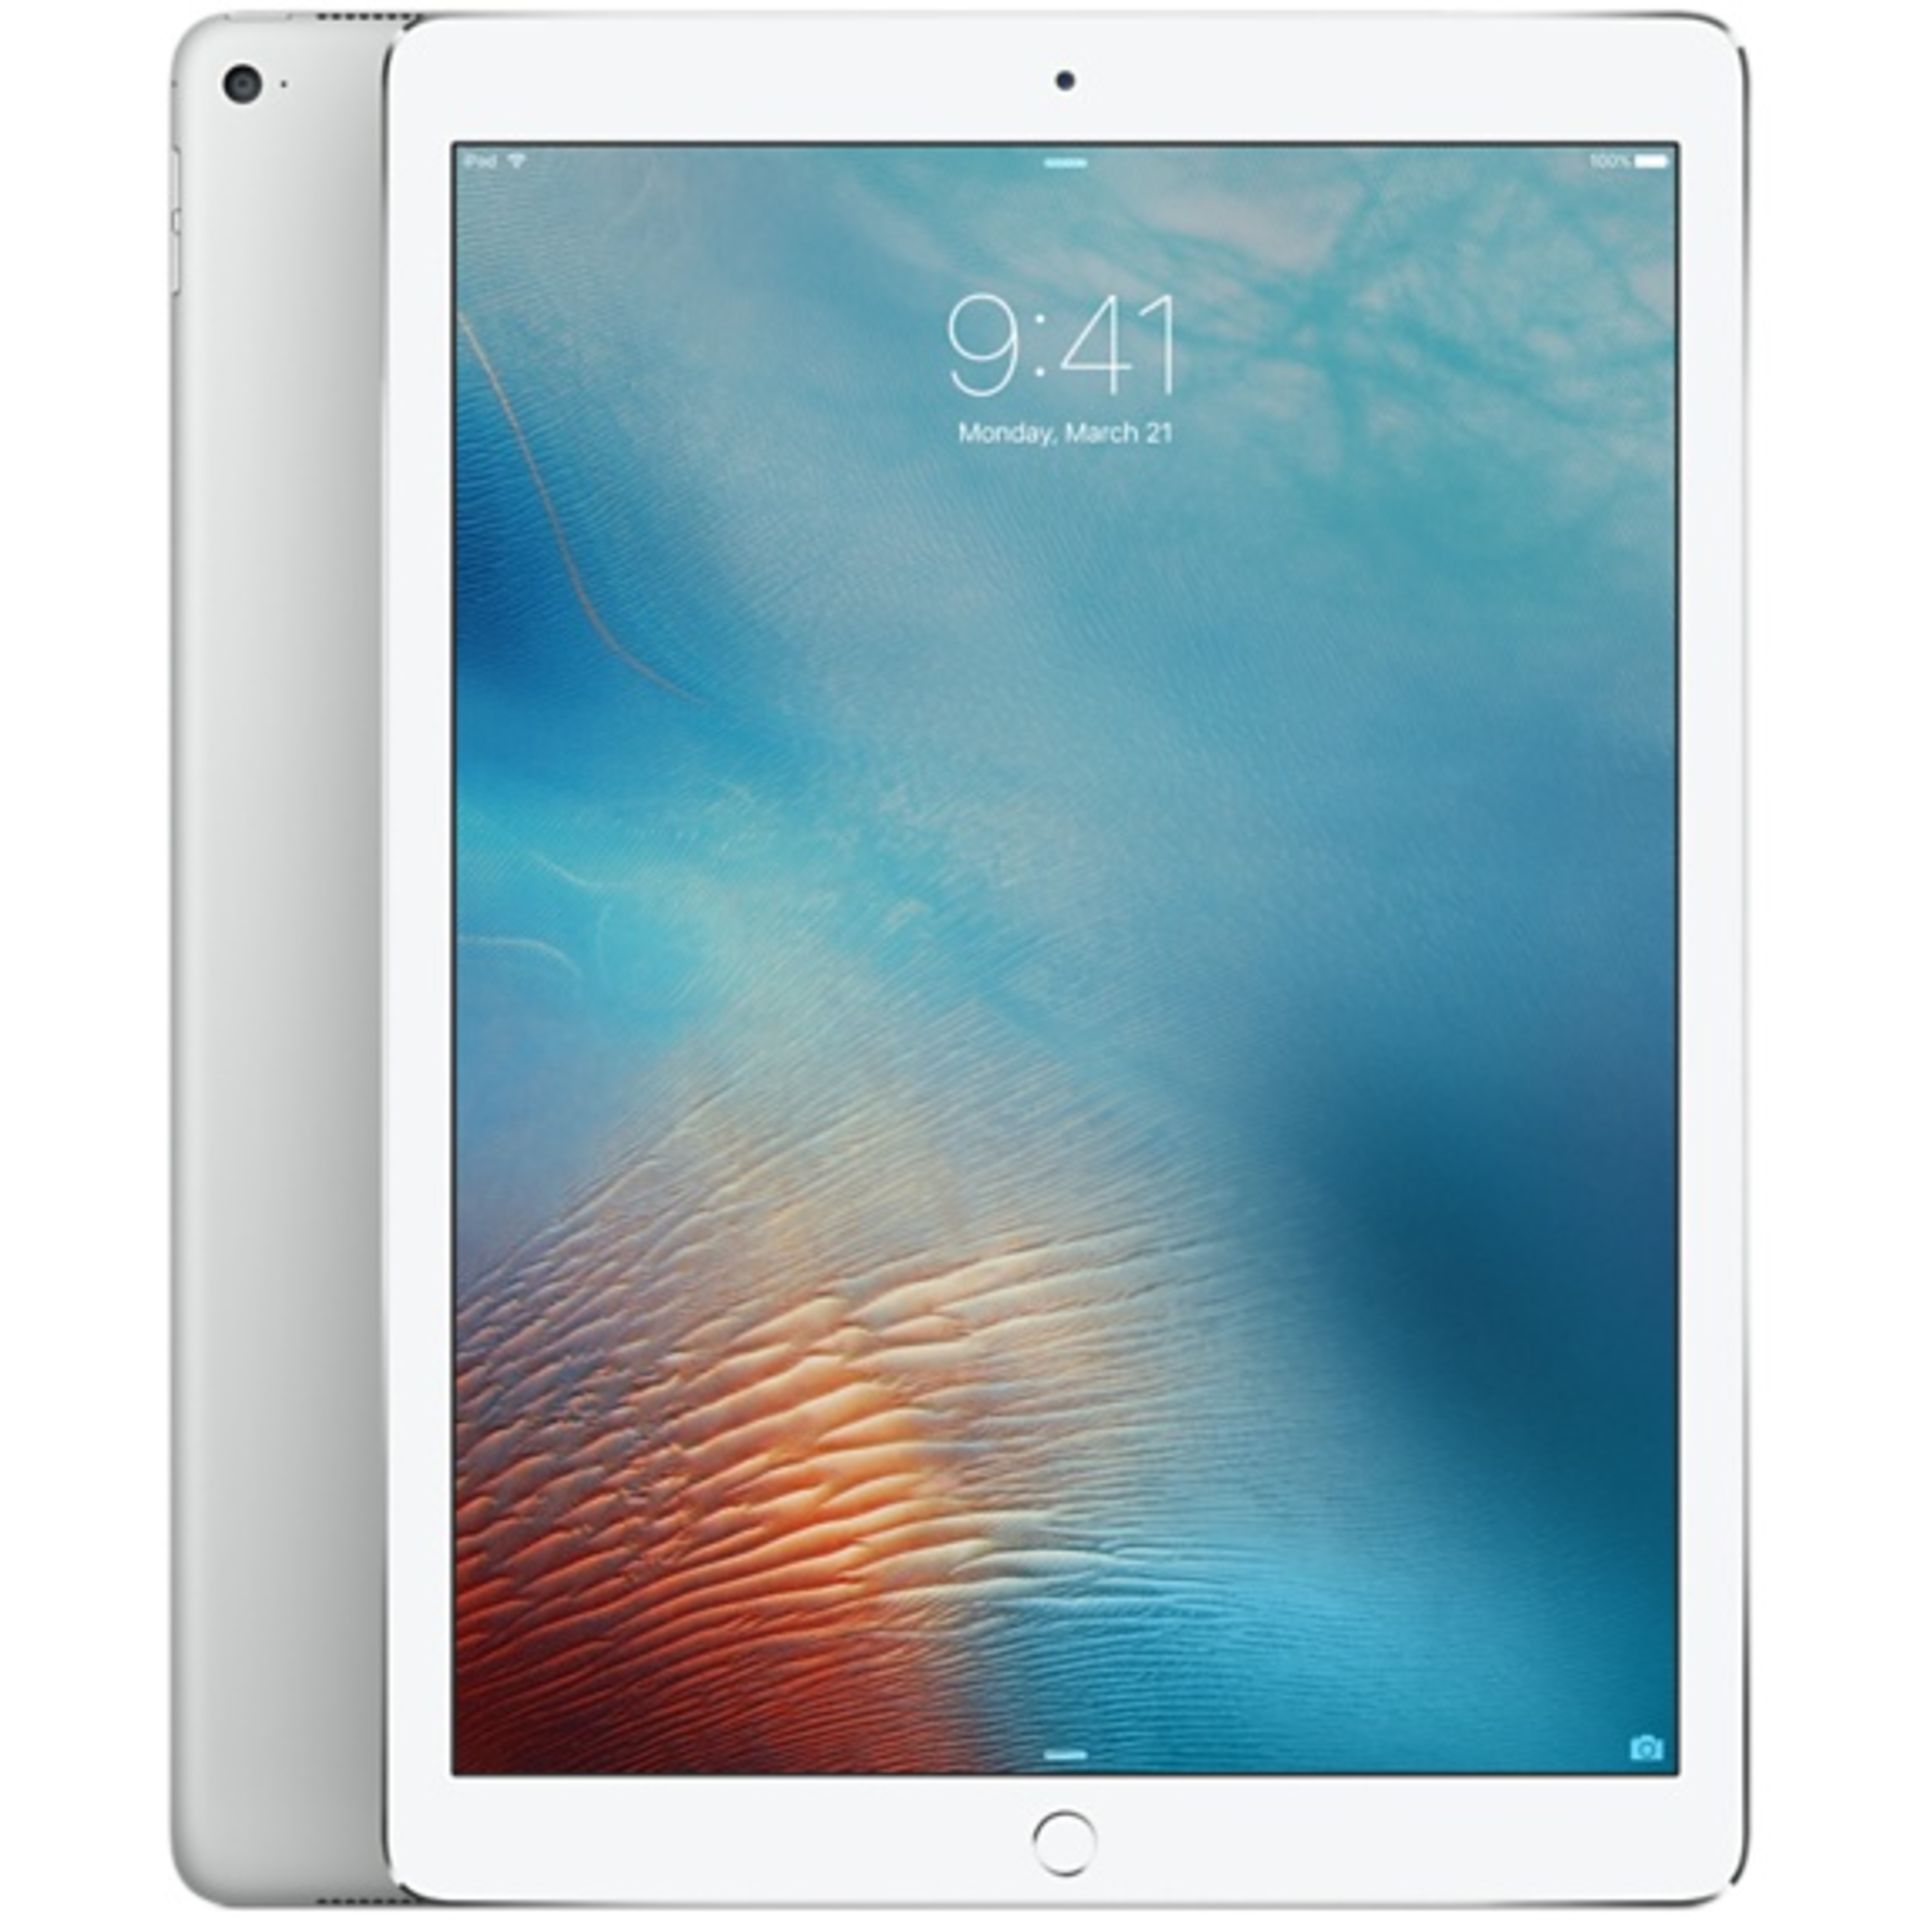 V Grade A Apple iPad Pro 12.9" Silver 32GB - Wi-Fi Only - with accessories and original box